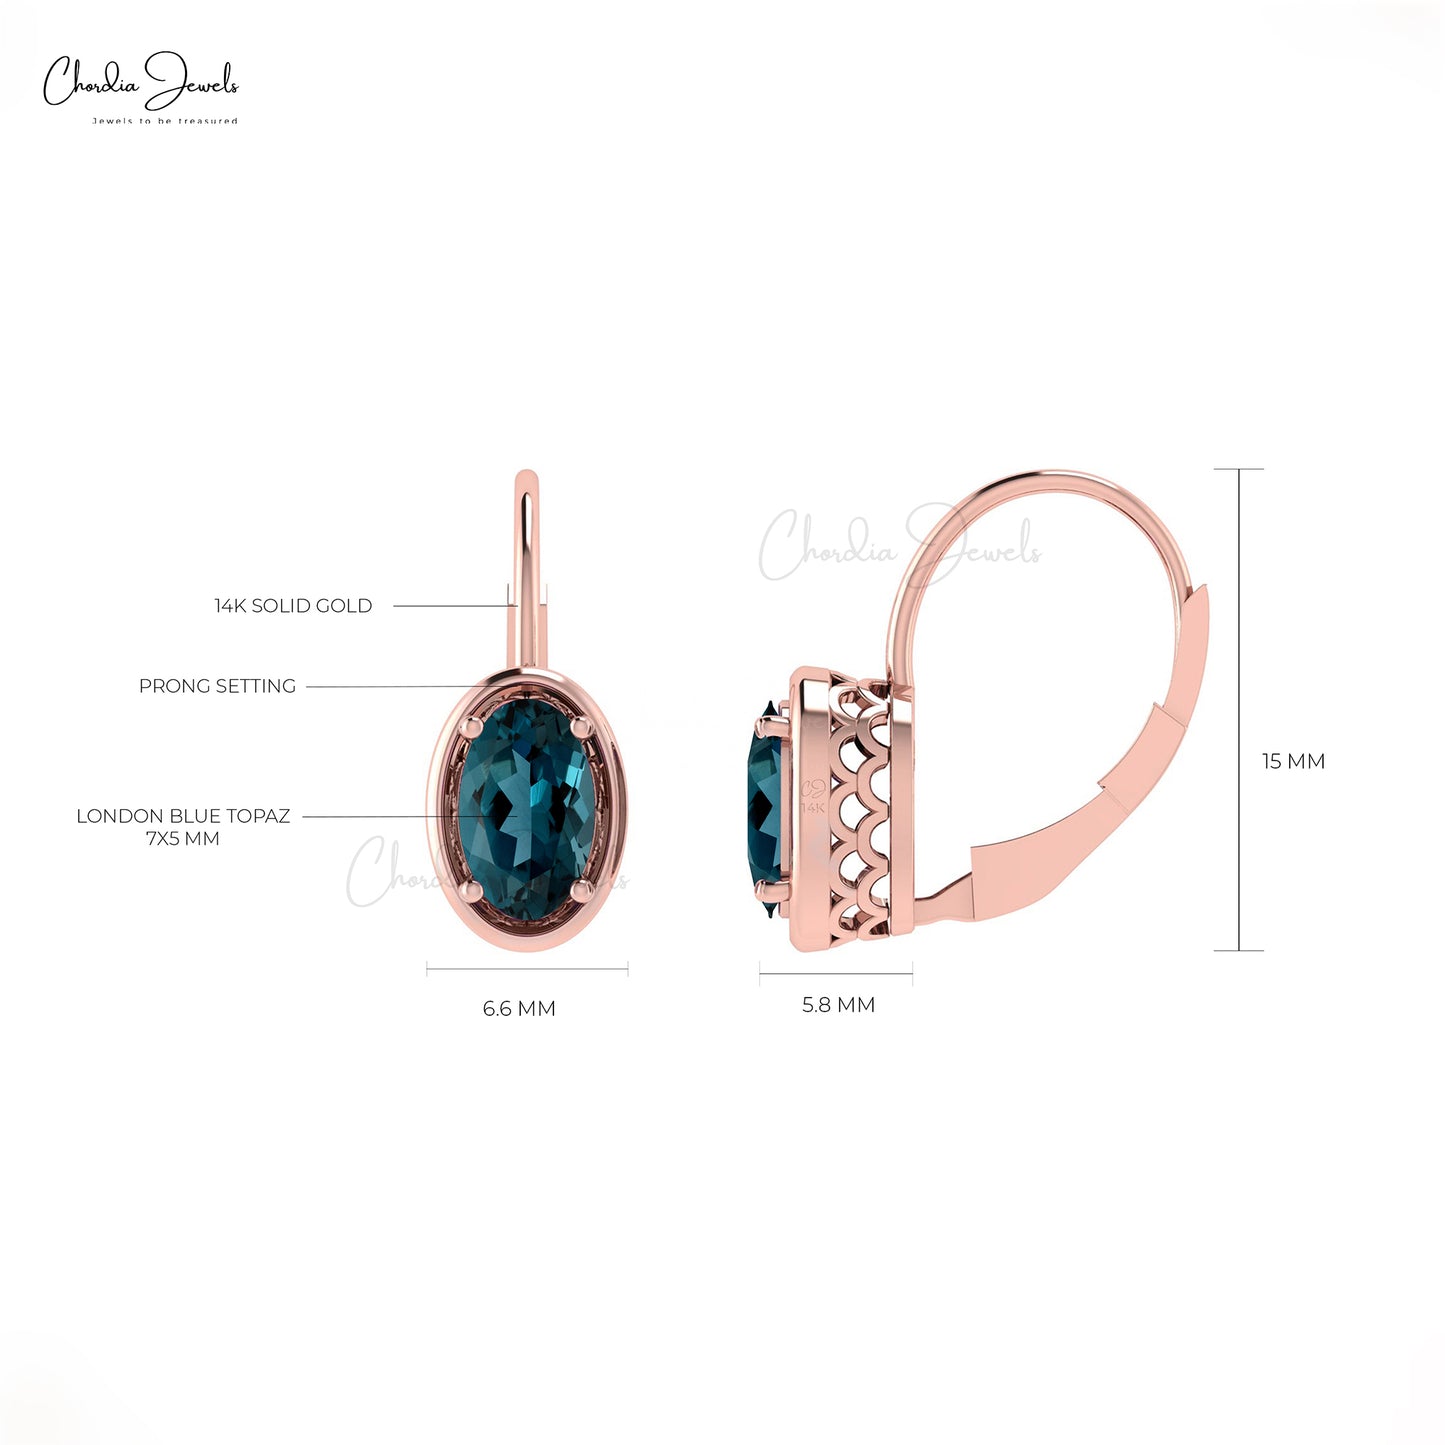 Load image into Gallery viewer, Elegant Beautiful Stylish Gemstone Earrings December Birthstone Natural London Blue Topaz Earrings With Lever Back Closure 14k Real Gold Fine Jewelry For Gift
